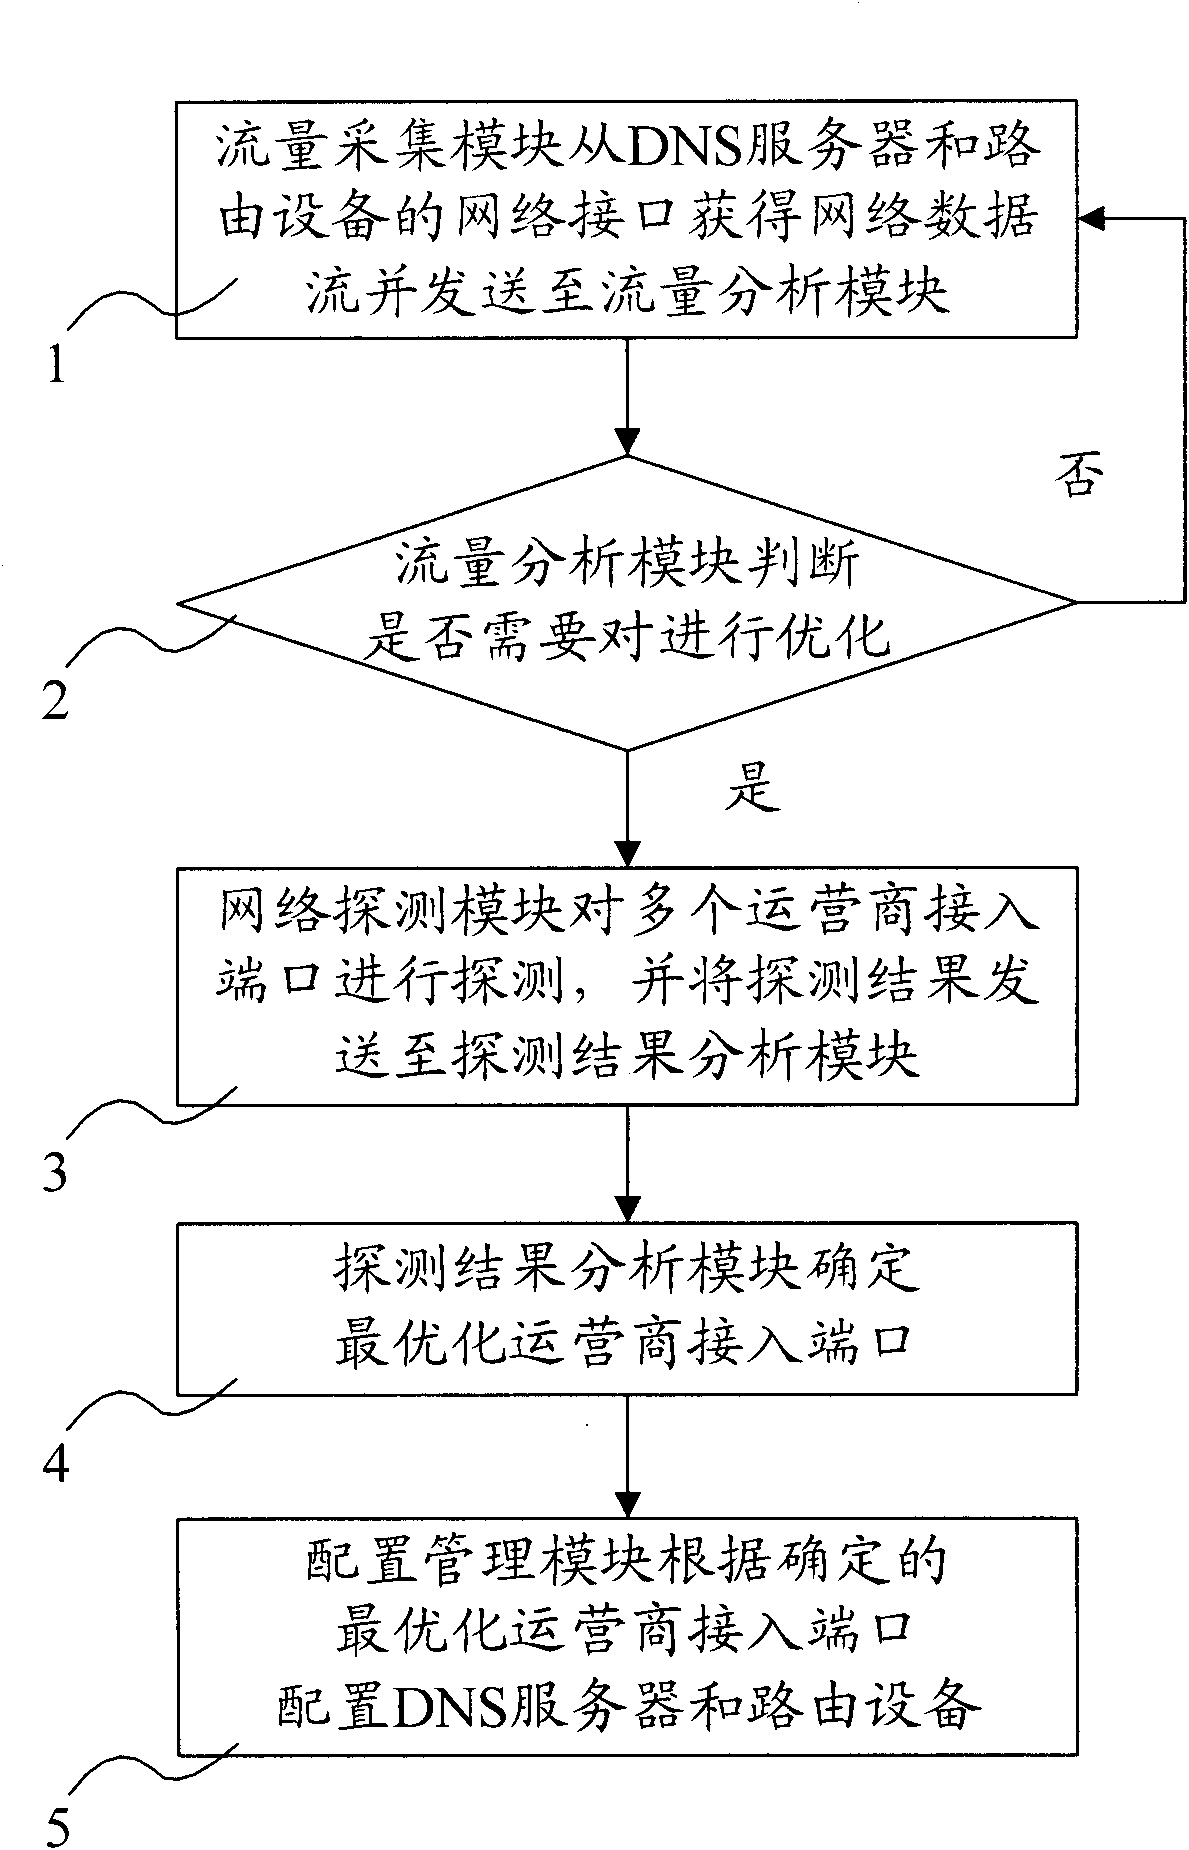 Data stream optimization device and method for realizing multi-ISP (internet service provider) access in local area network